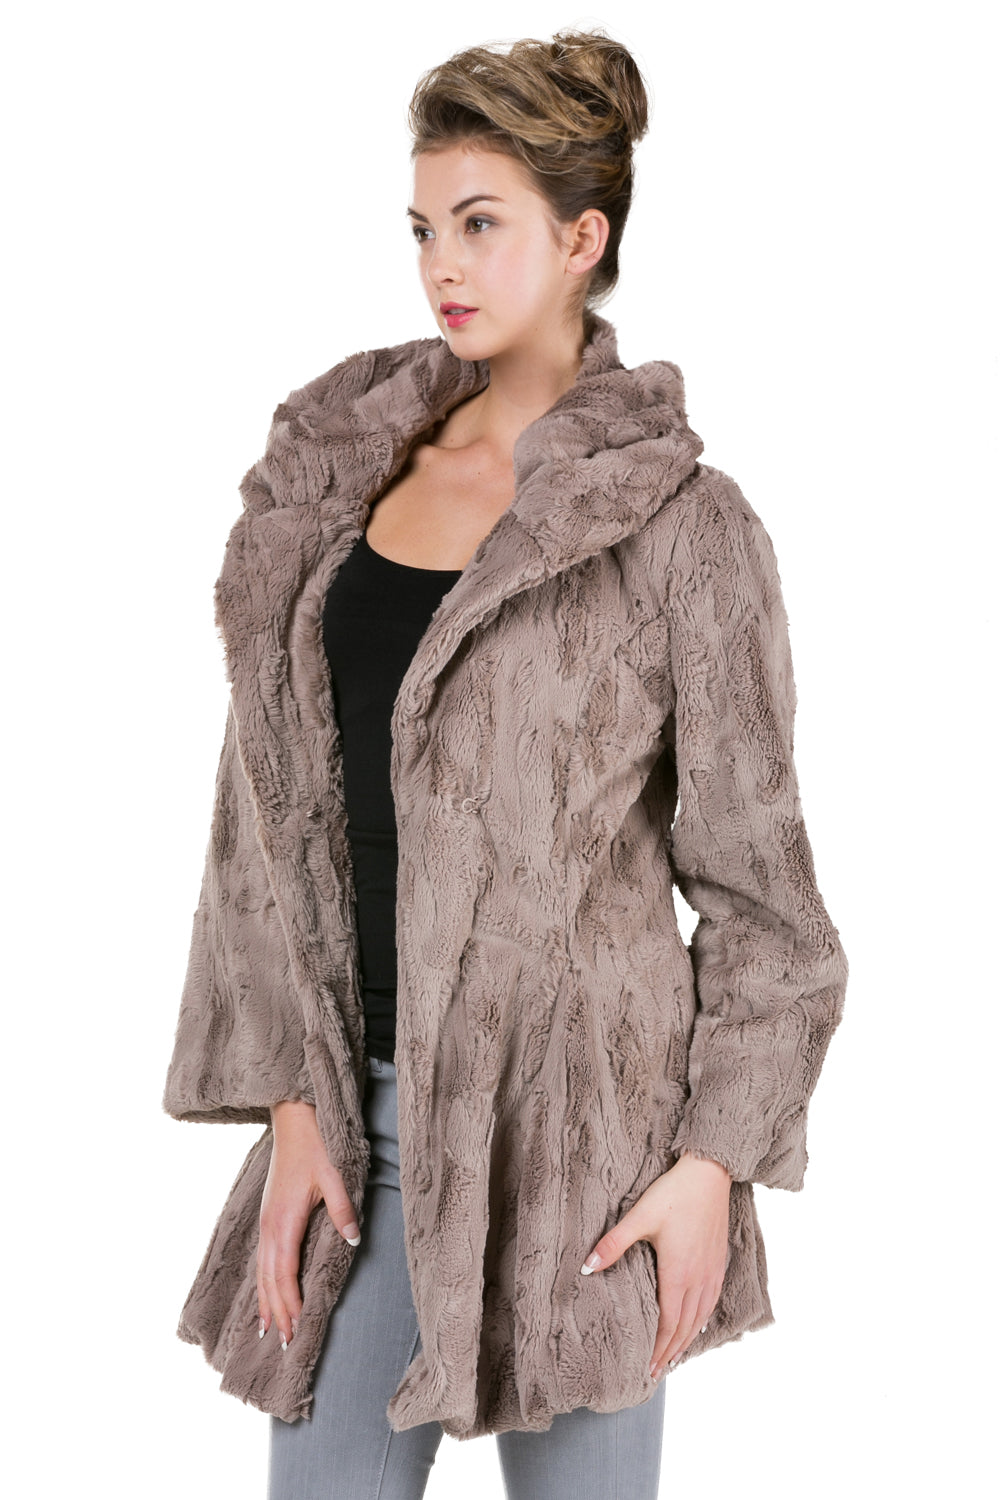 Women's Faux Fur Jacket with Synthetic Swede Belt and Flare Sleeves - Shop Lev